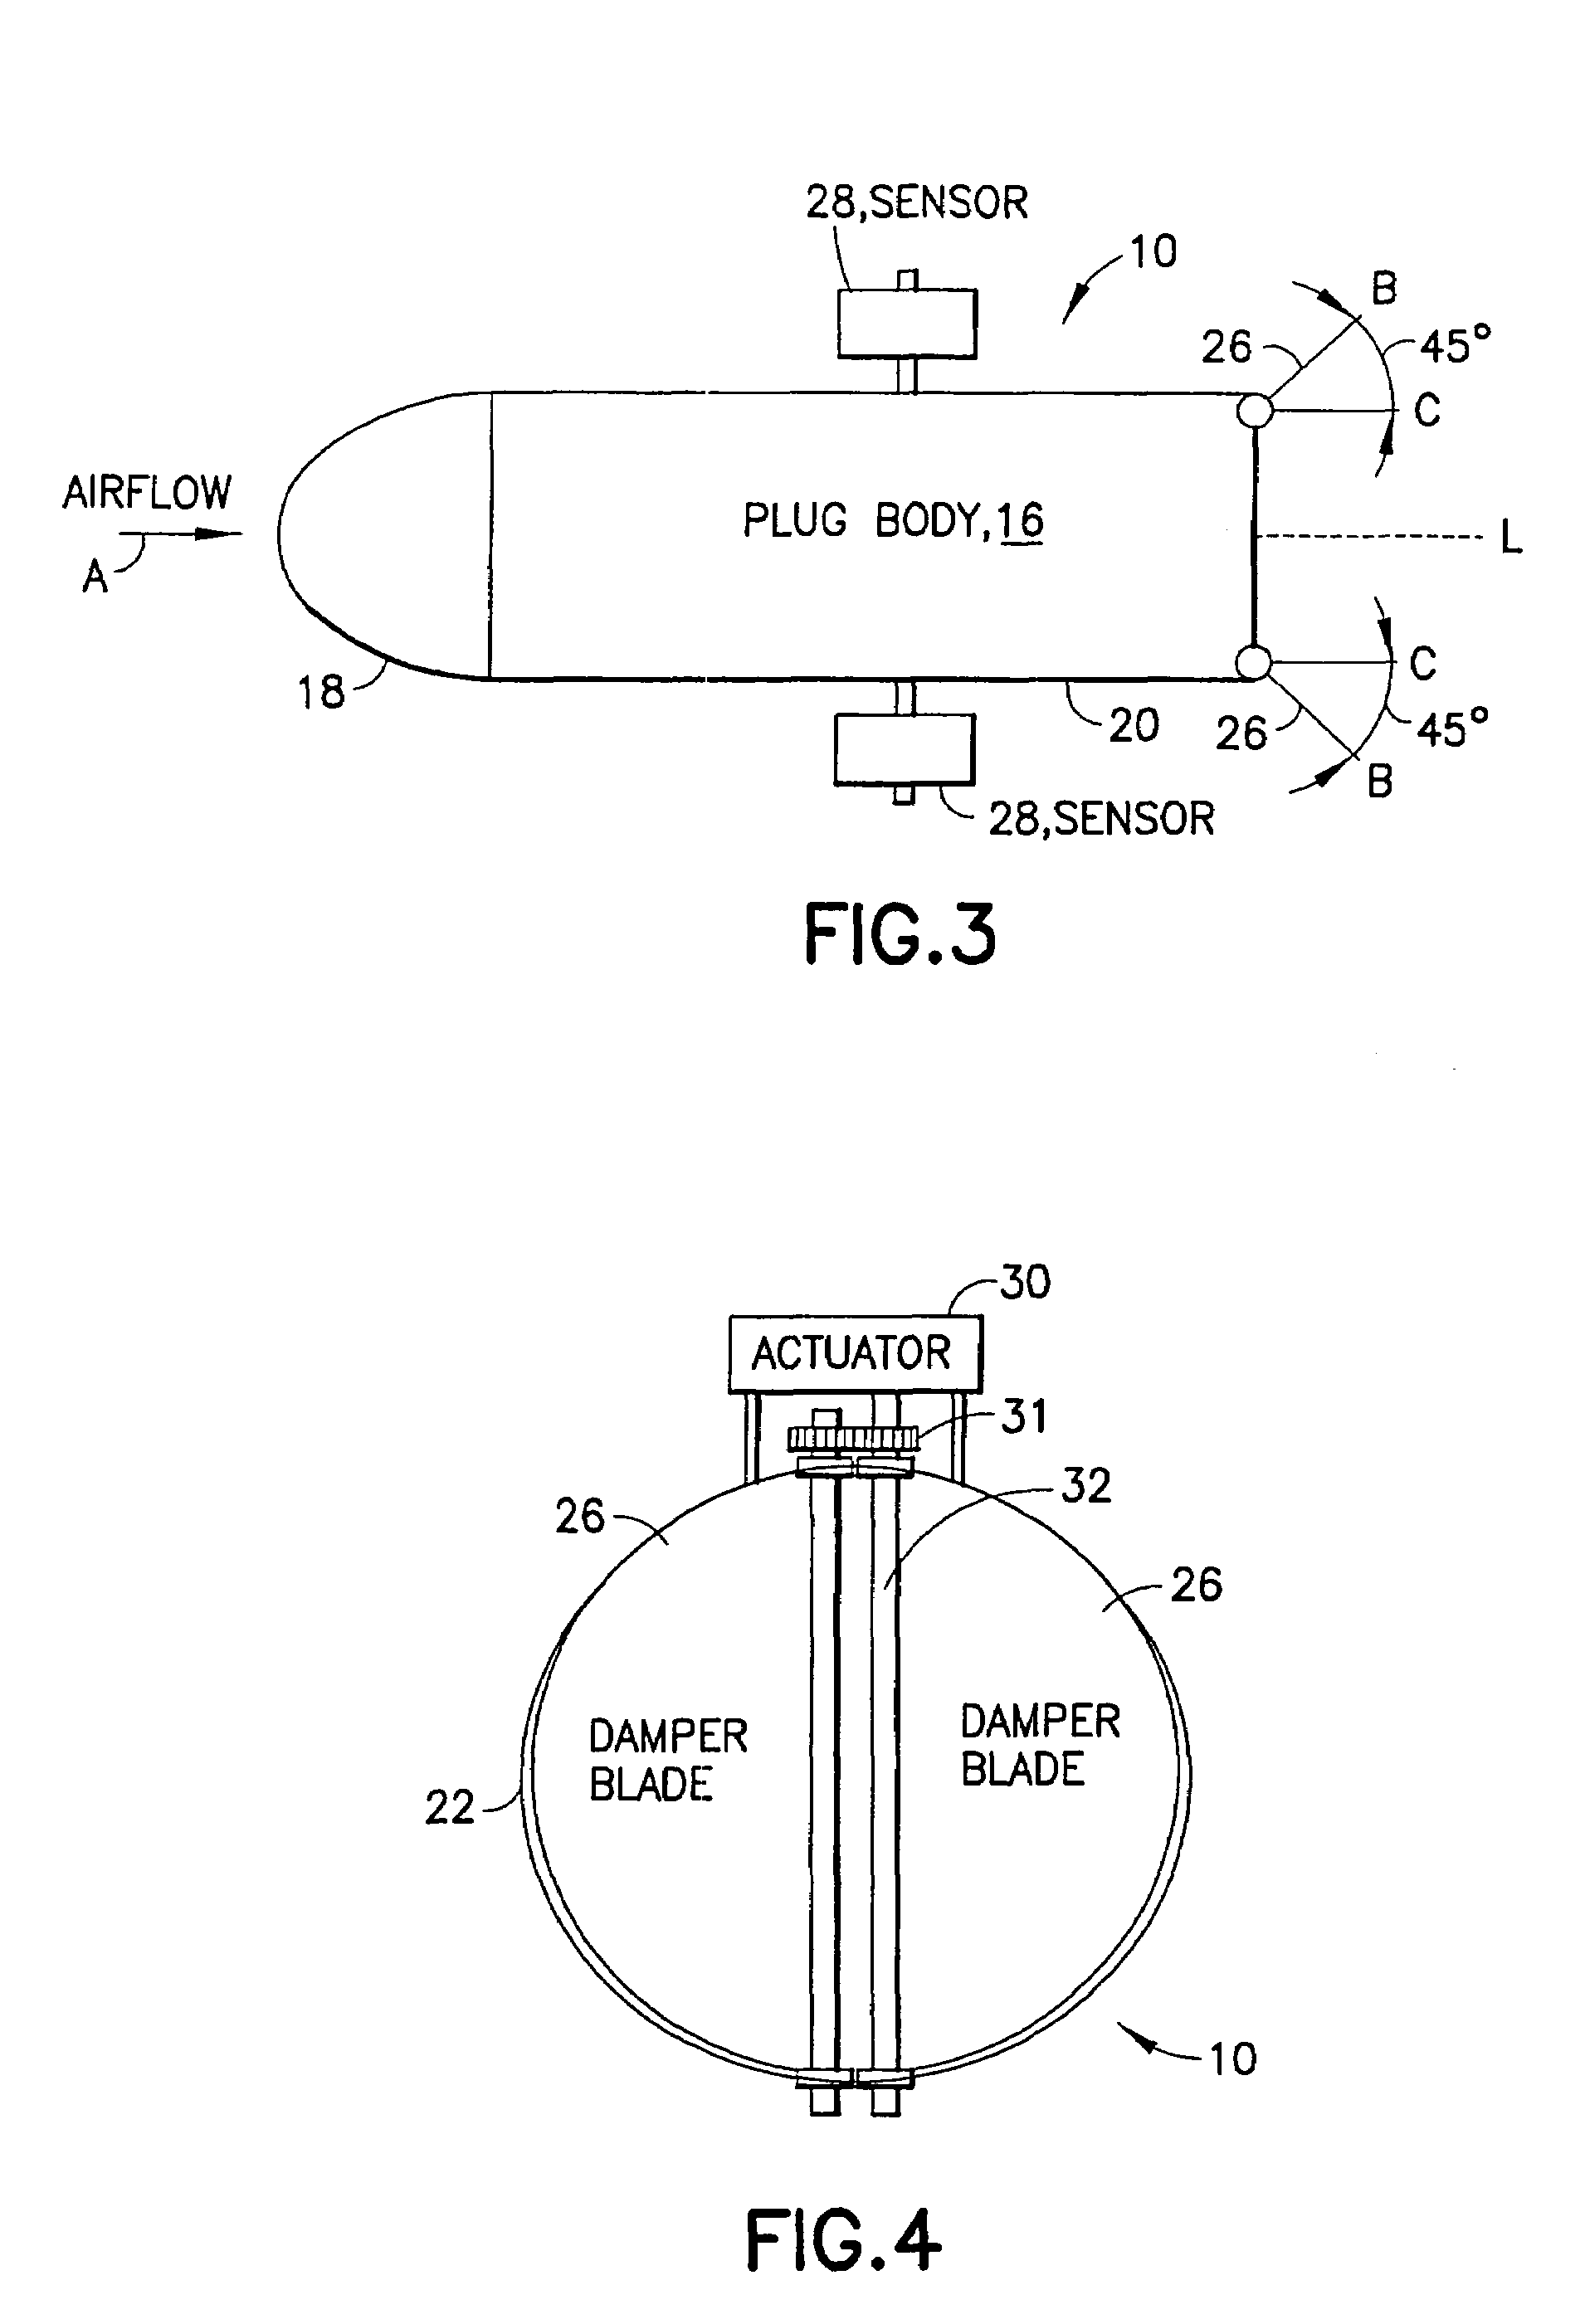 Multi-valve damper for controlling airflow and method for controlling airflow